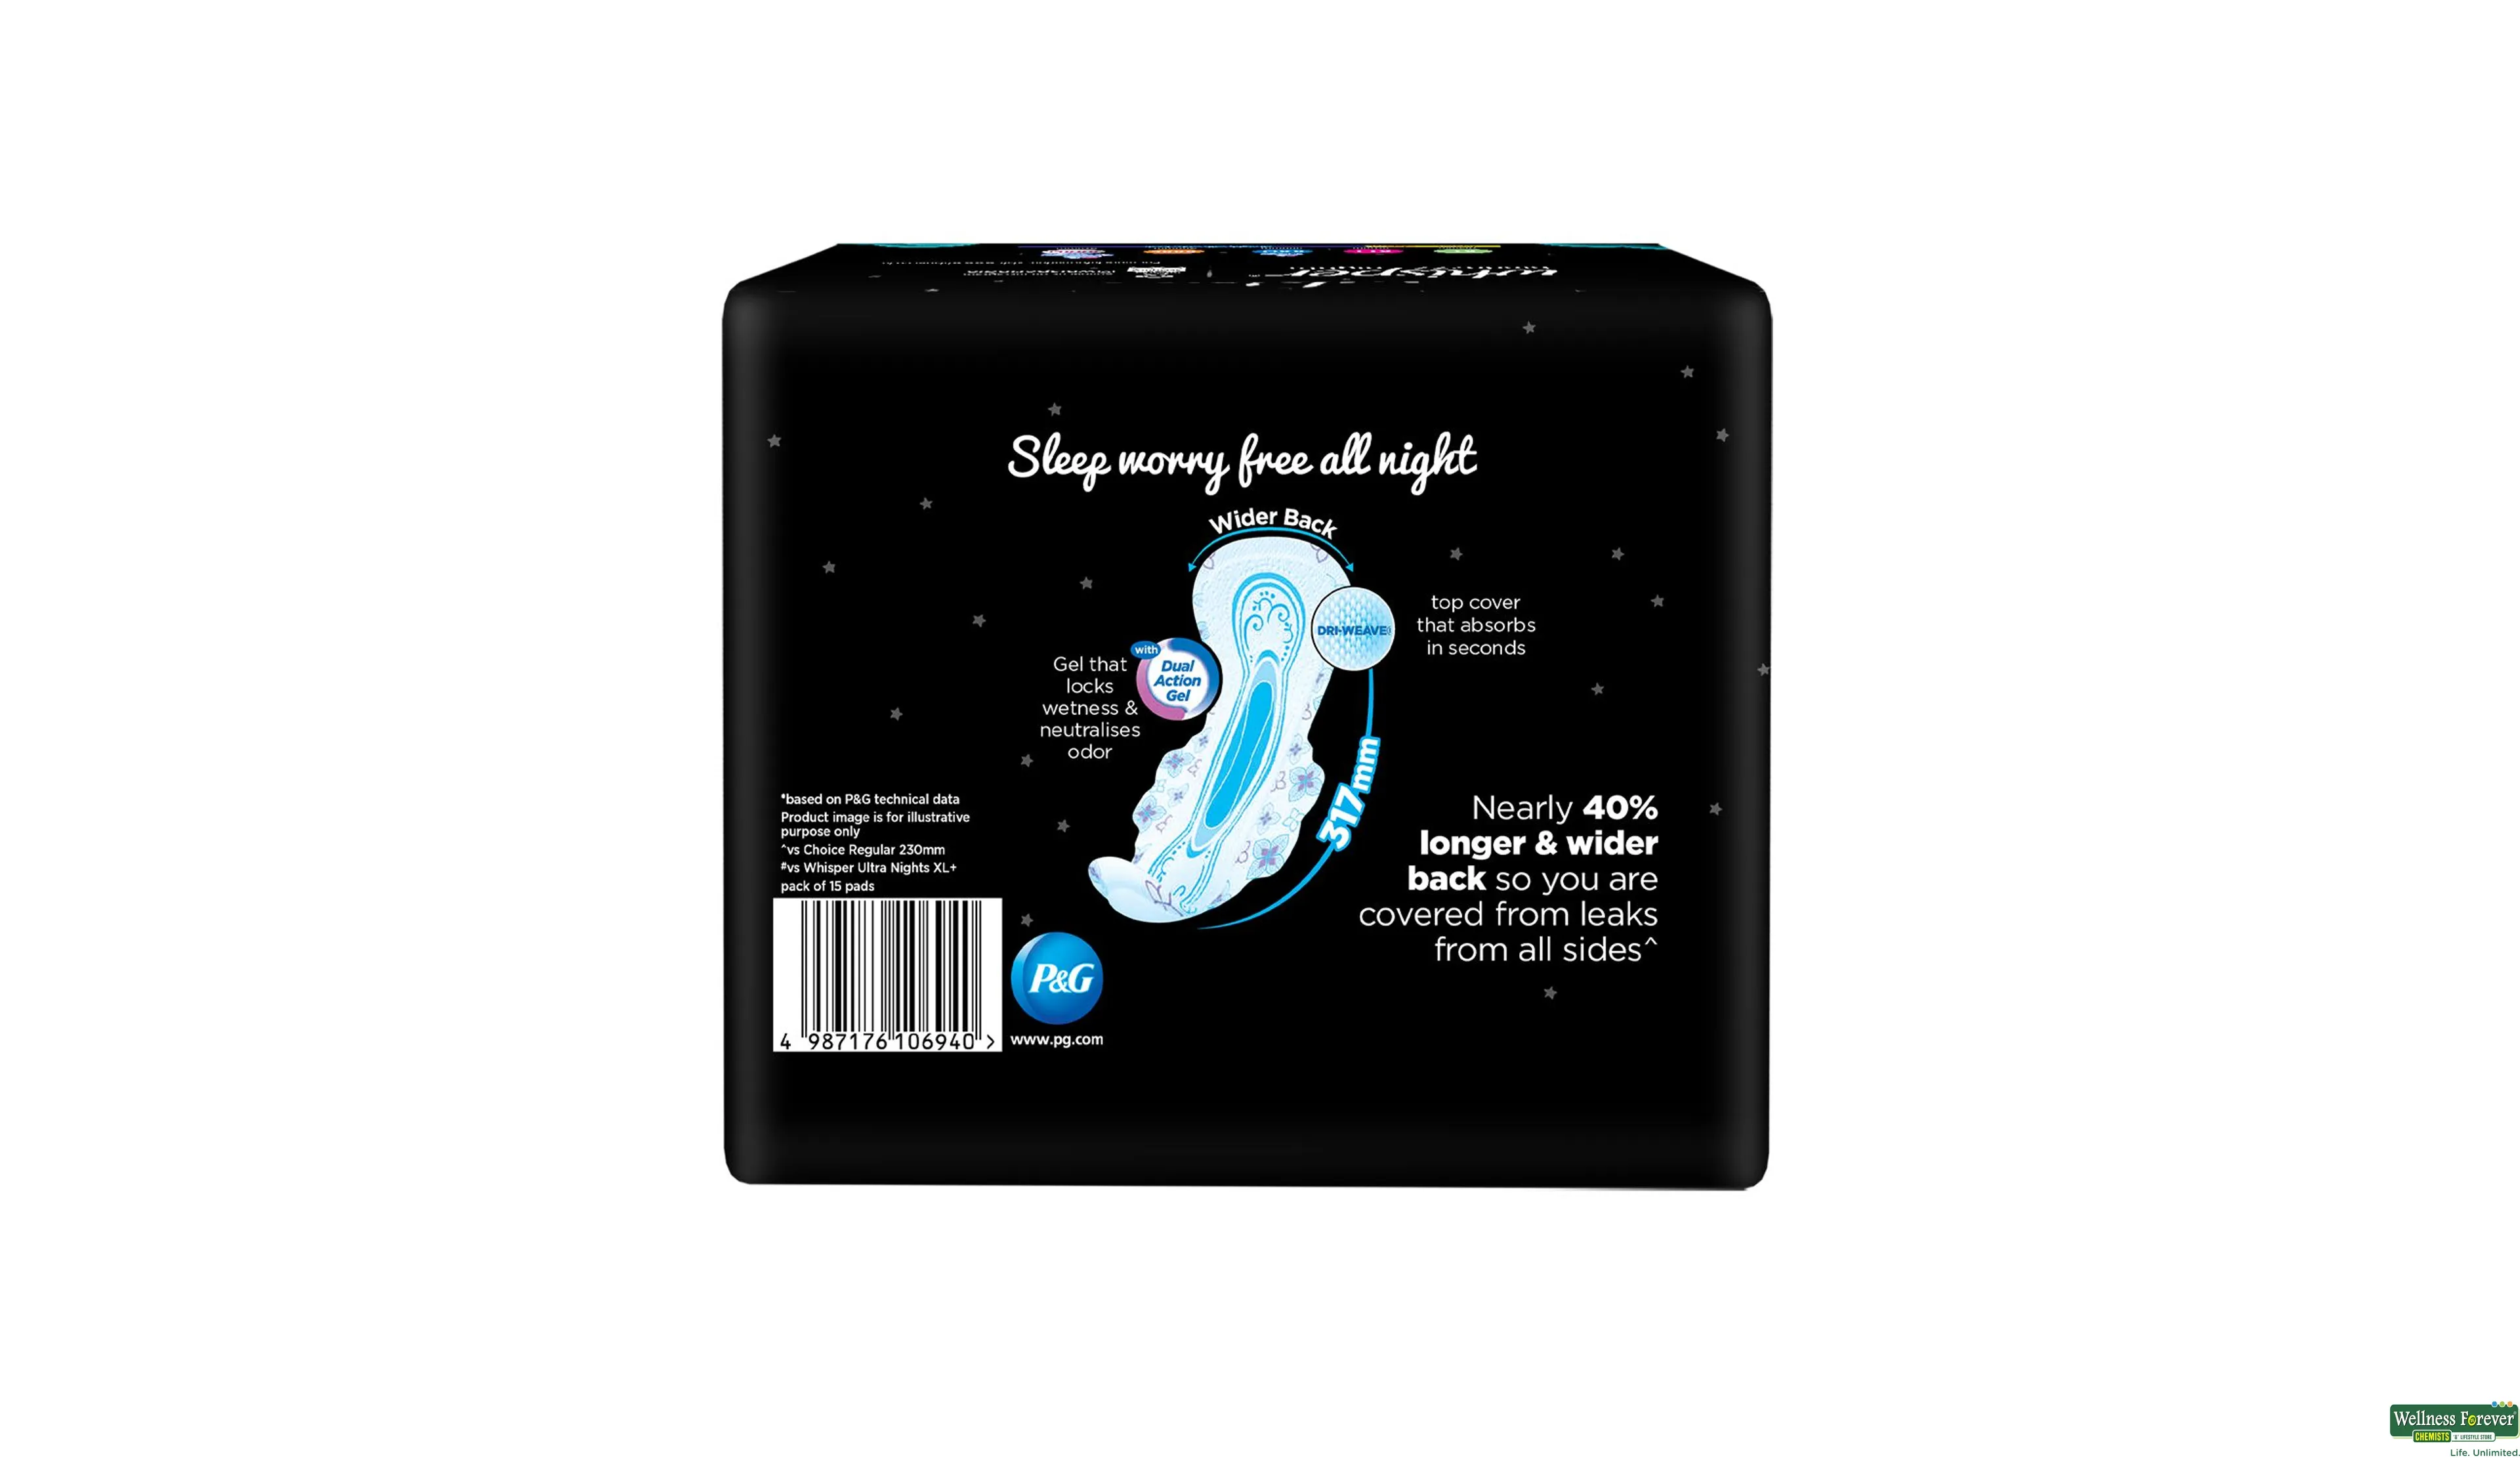 Buy Whisper bindazzzz night period panties 6 +7+7 whisper maxi nights pad  Pack of 3 Online at Low Prices in India 